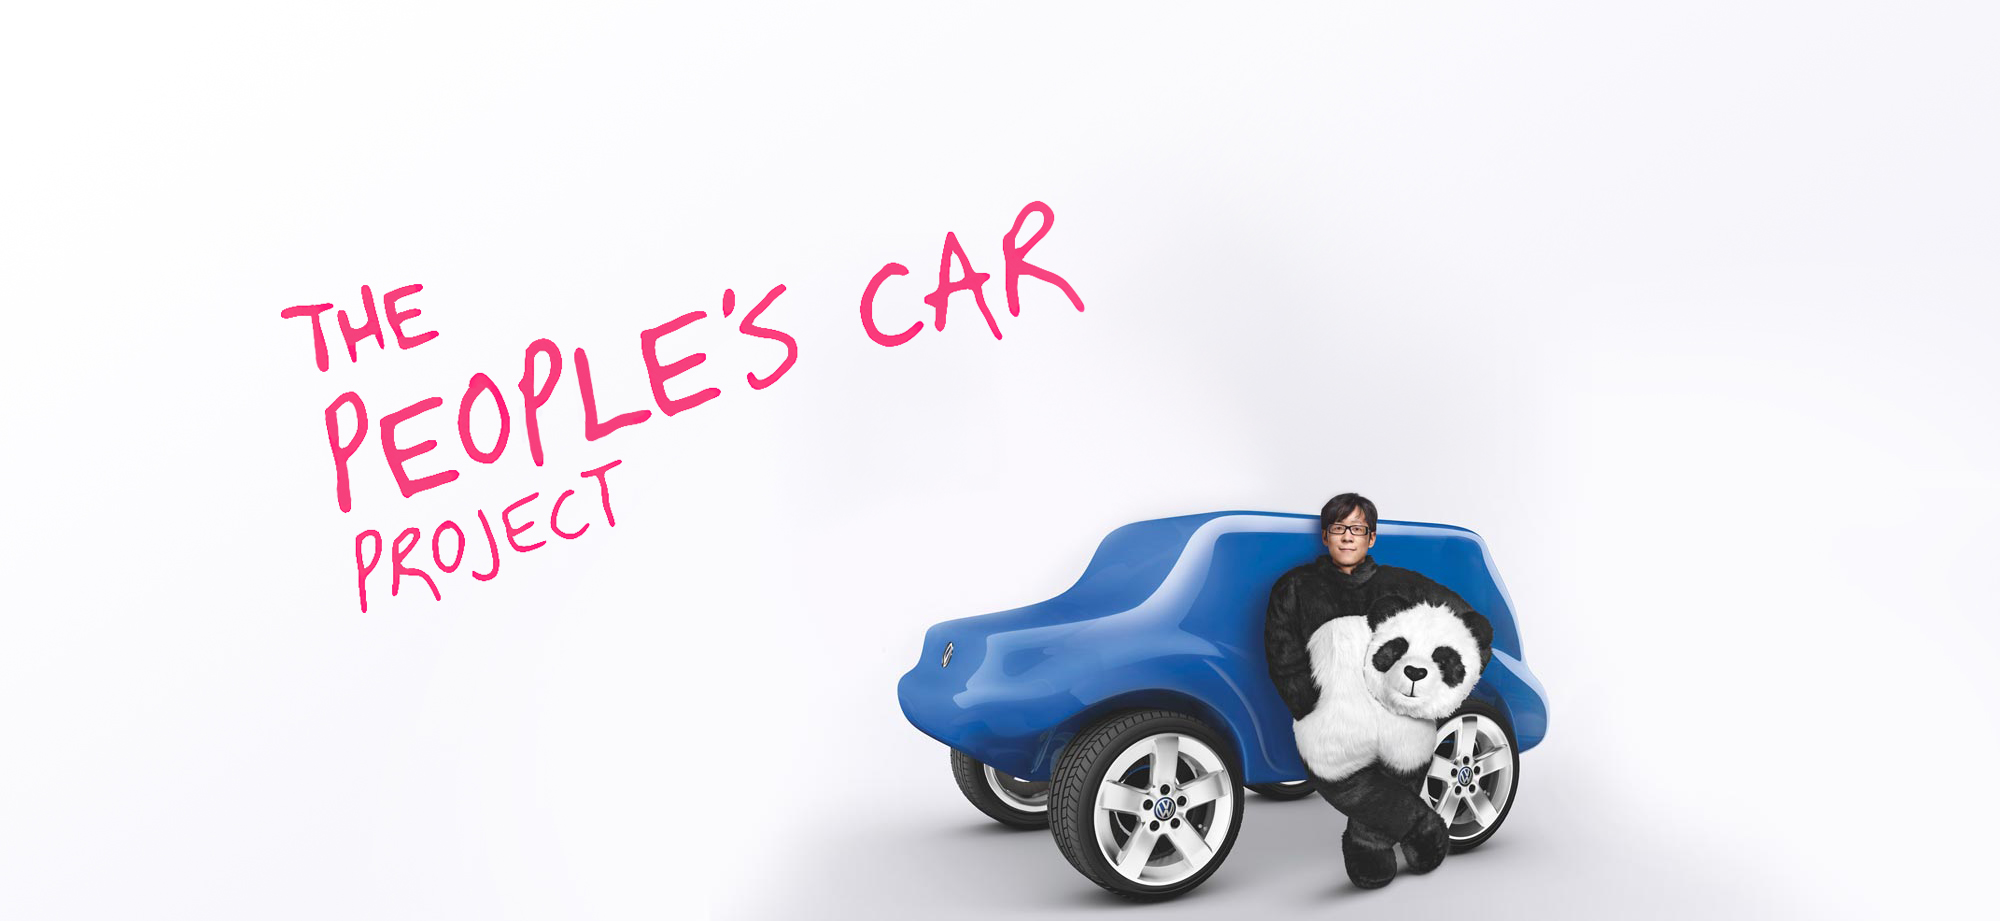 VW People’s Car Project